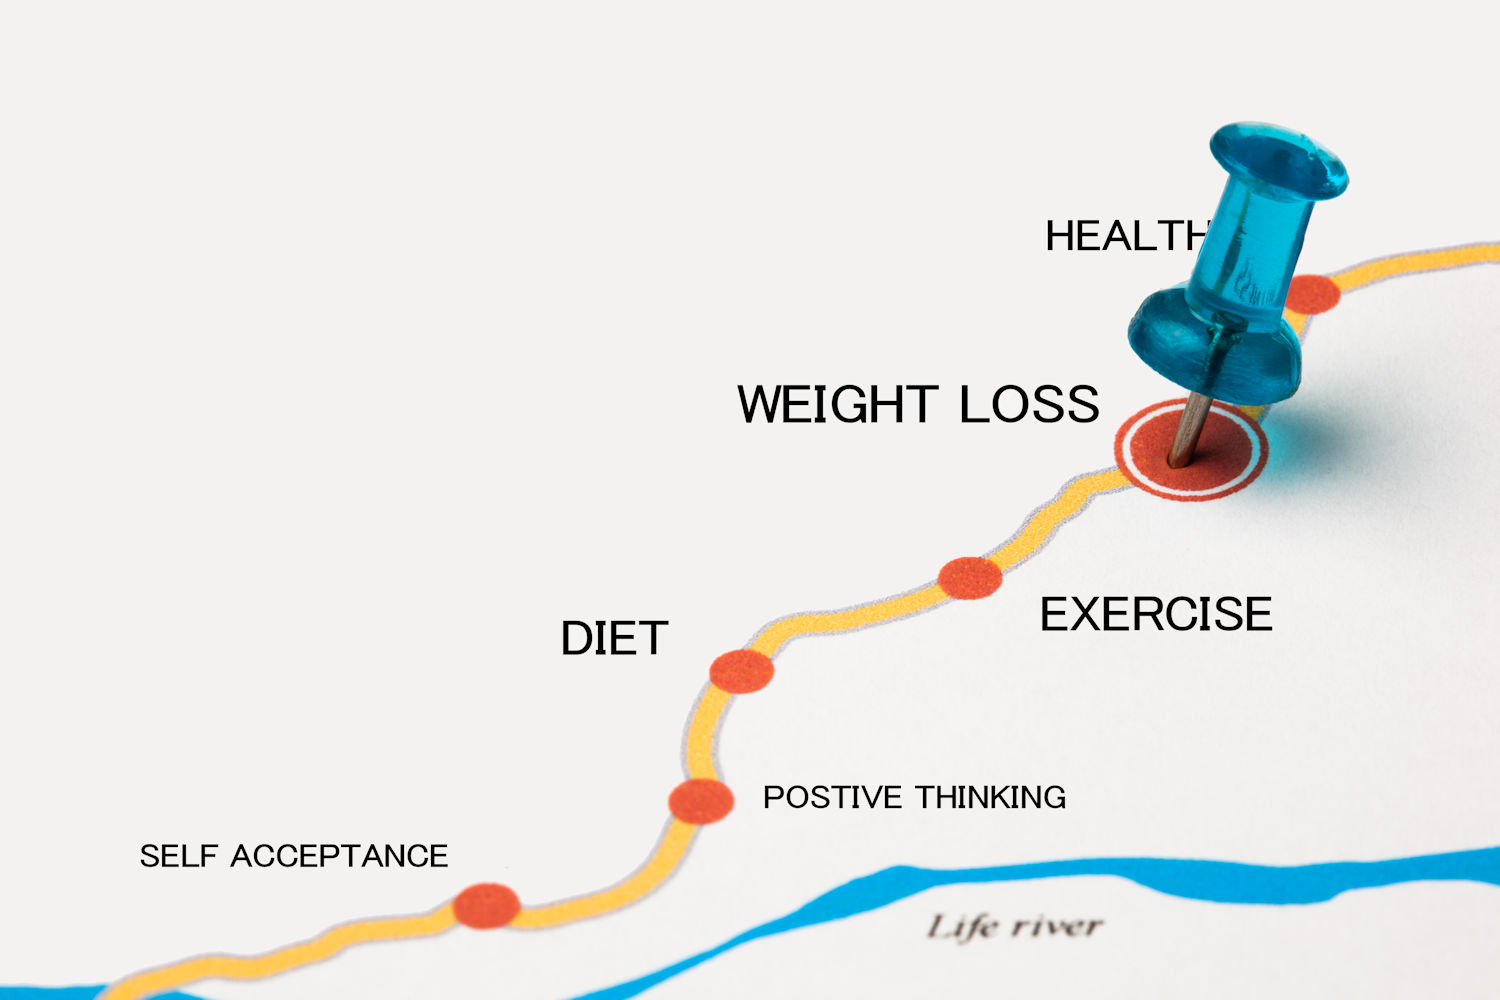 Diet vs Exercise: route to weight loss